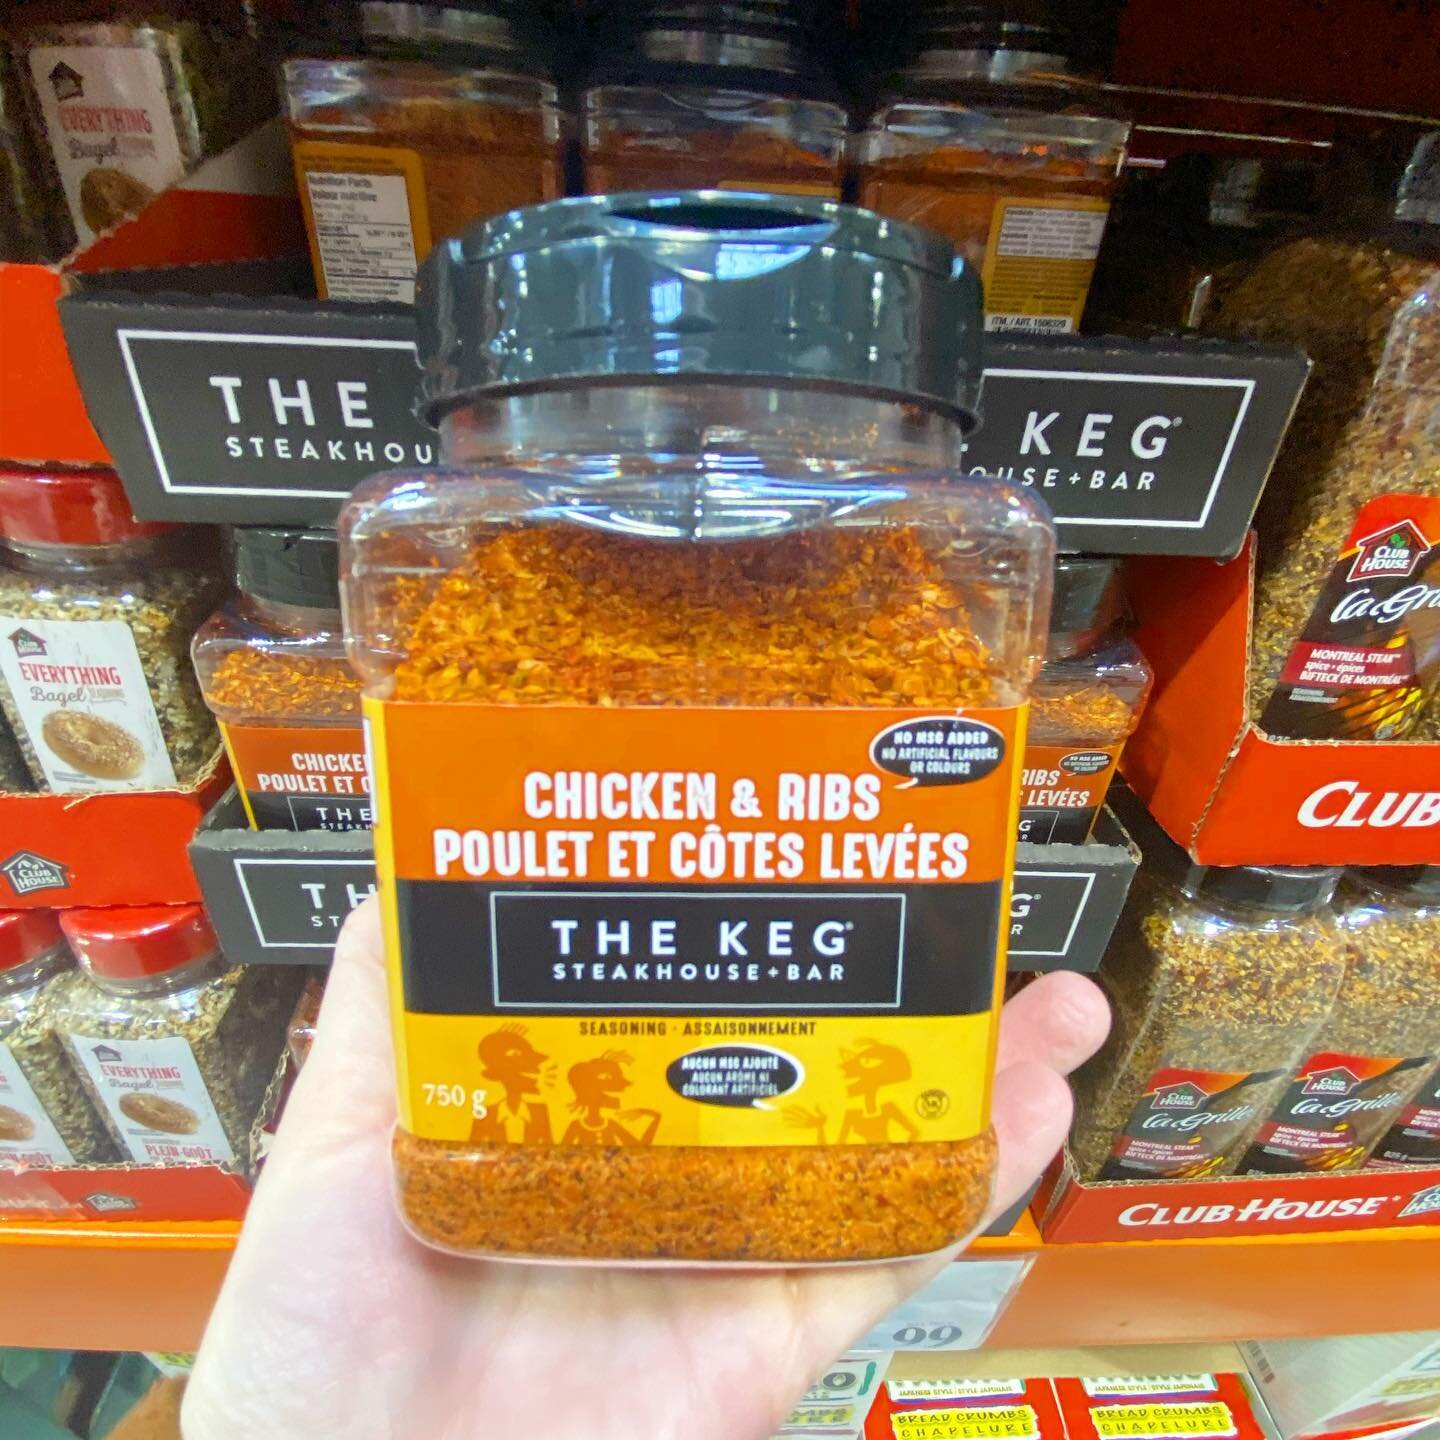 Chicken and Rib Seasoning from @thekegsteakhouse - I believe this is new! No MSG added and no artificial flavours. Price $5.99 📍Newmarket 
#costco #costcofindscanada #costcofinds #costcohaul #costcobuys #costcodelights #costcodeals #costcowholesale 